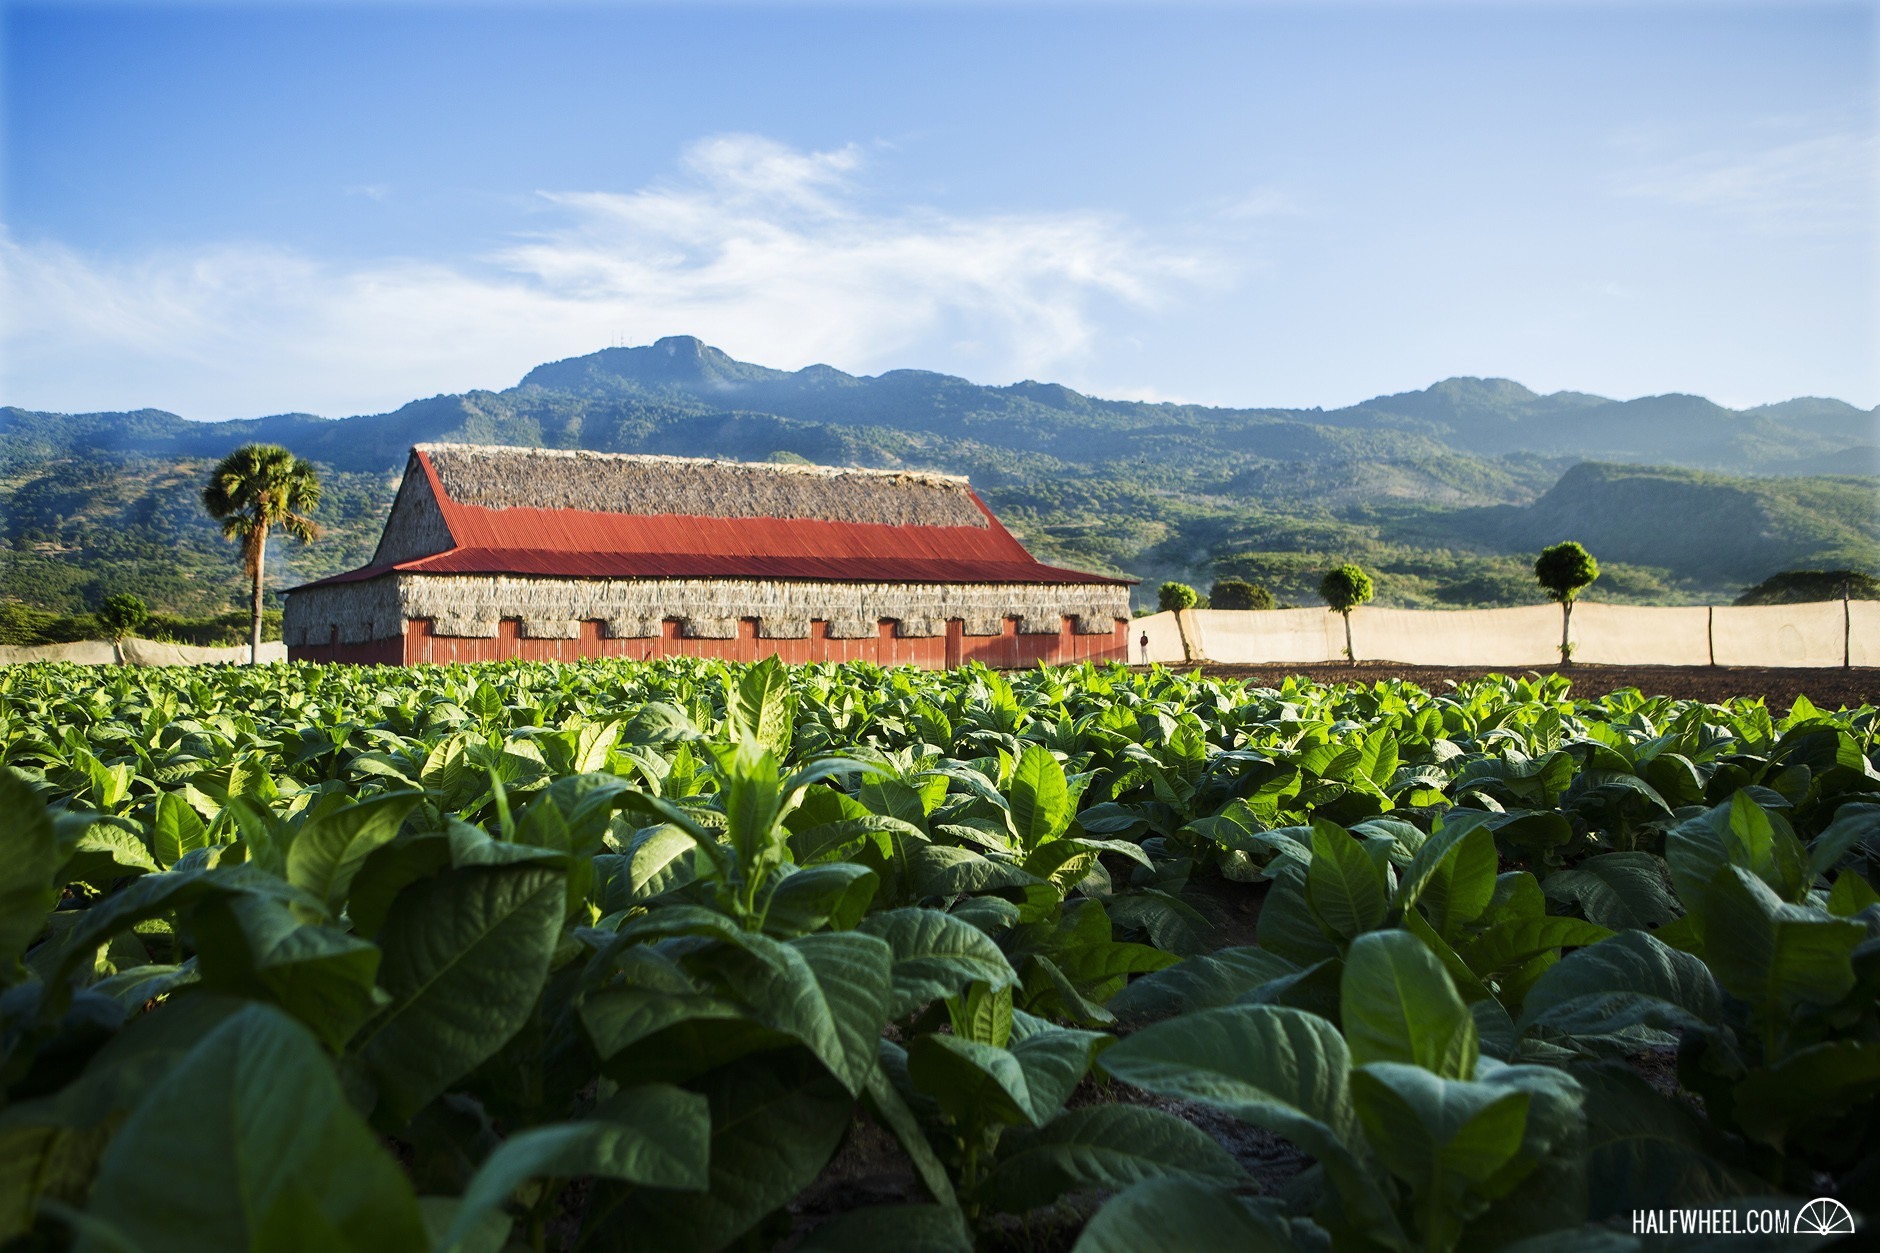 The sun rises over a field of tobacco and curing barn.